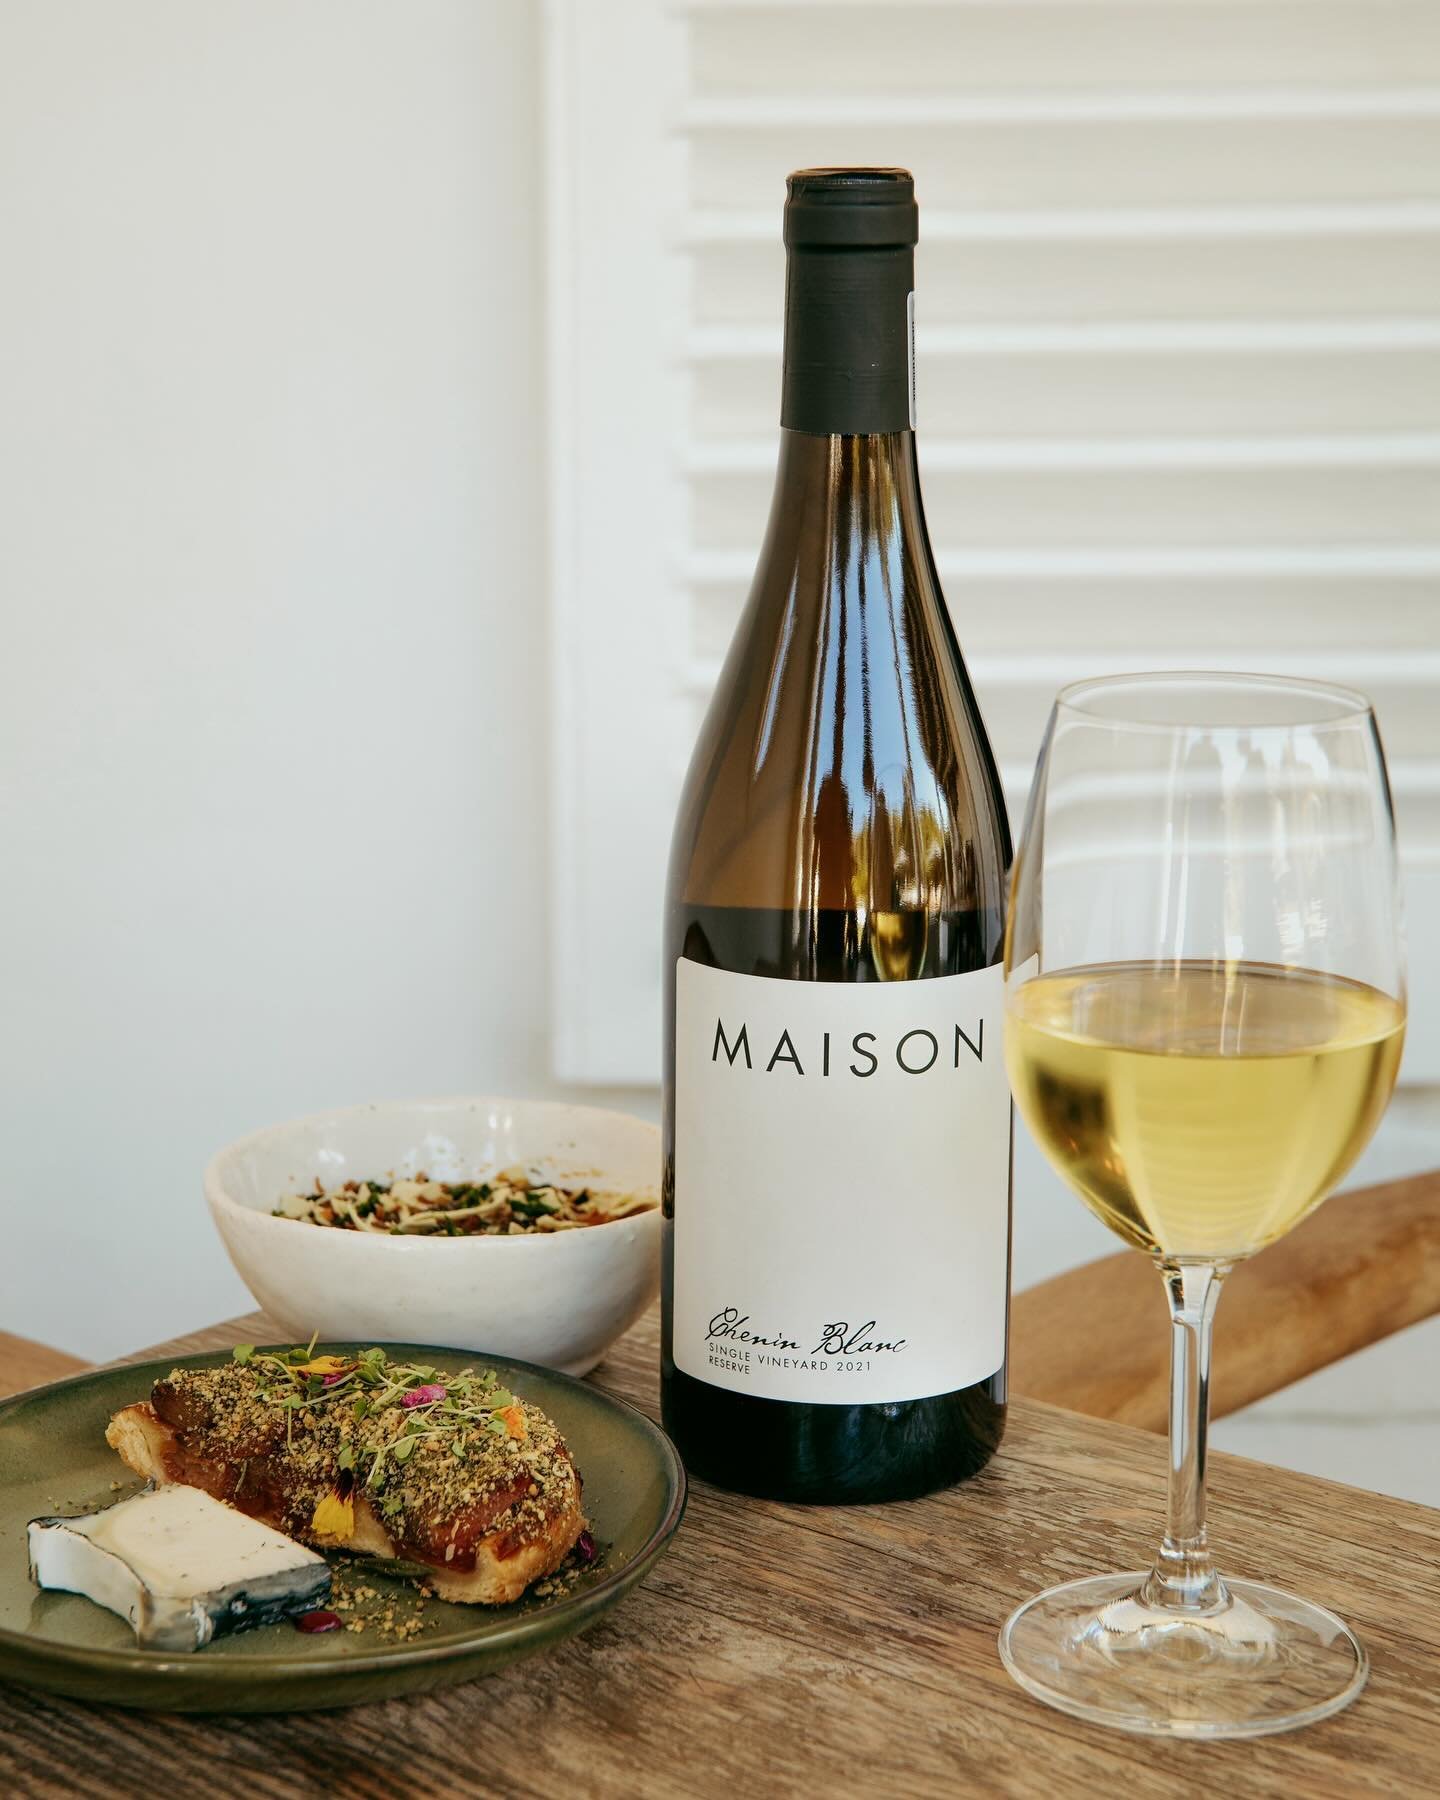 Matching good wines with dishes is an art. At MAISON, we are masters of pairing our award winning wines with special dishes that elevate flavors.

Are you ready for a culinary journey that delights the senses.?🍷🍽✨

@chefswarehousemaison

Book your 